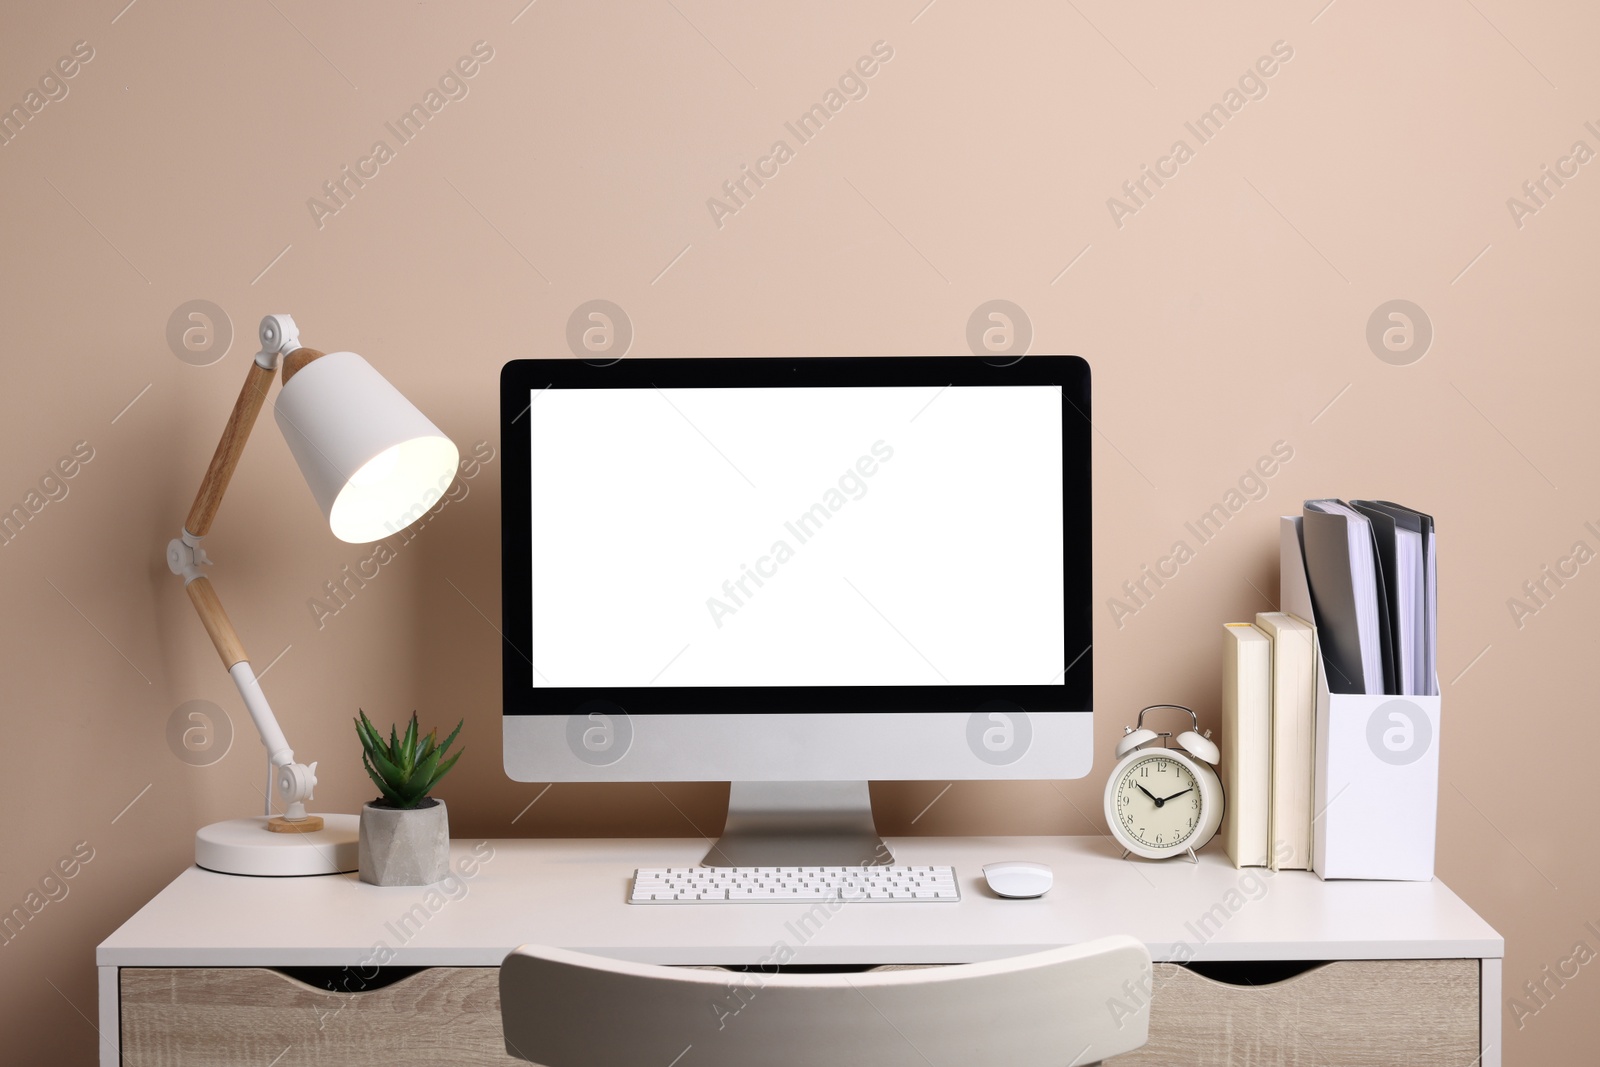 Photo of Cozy workspace with computer, lamp, houseplant and stationery on wooden desk